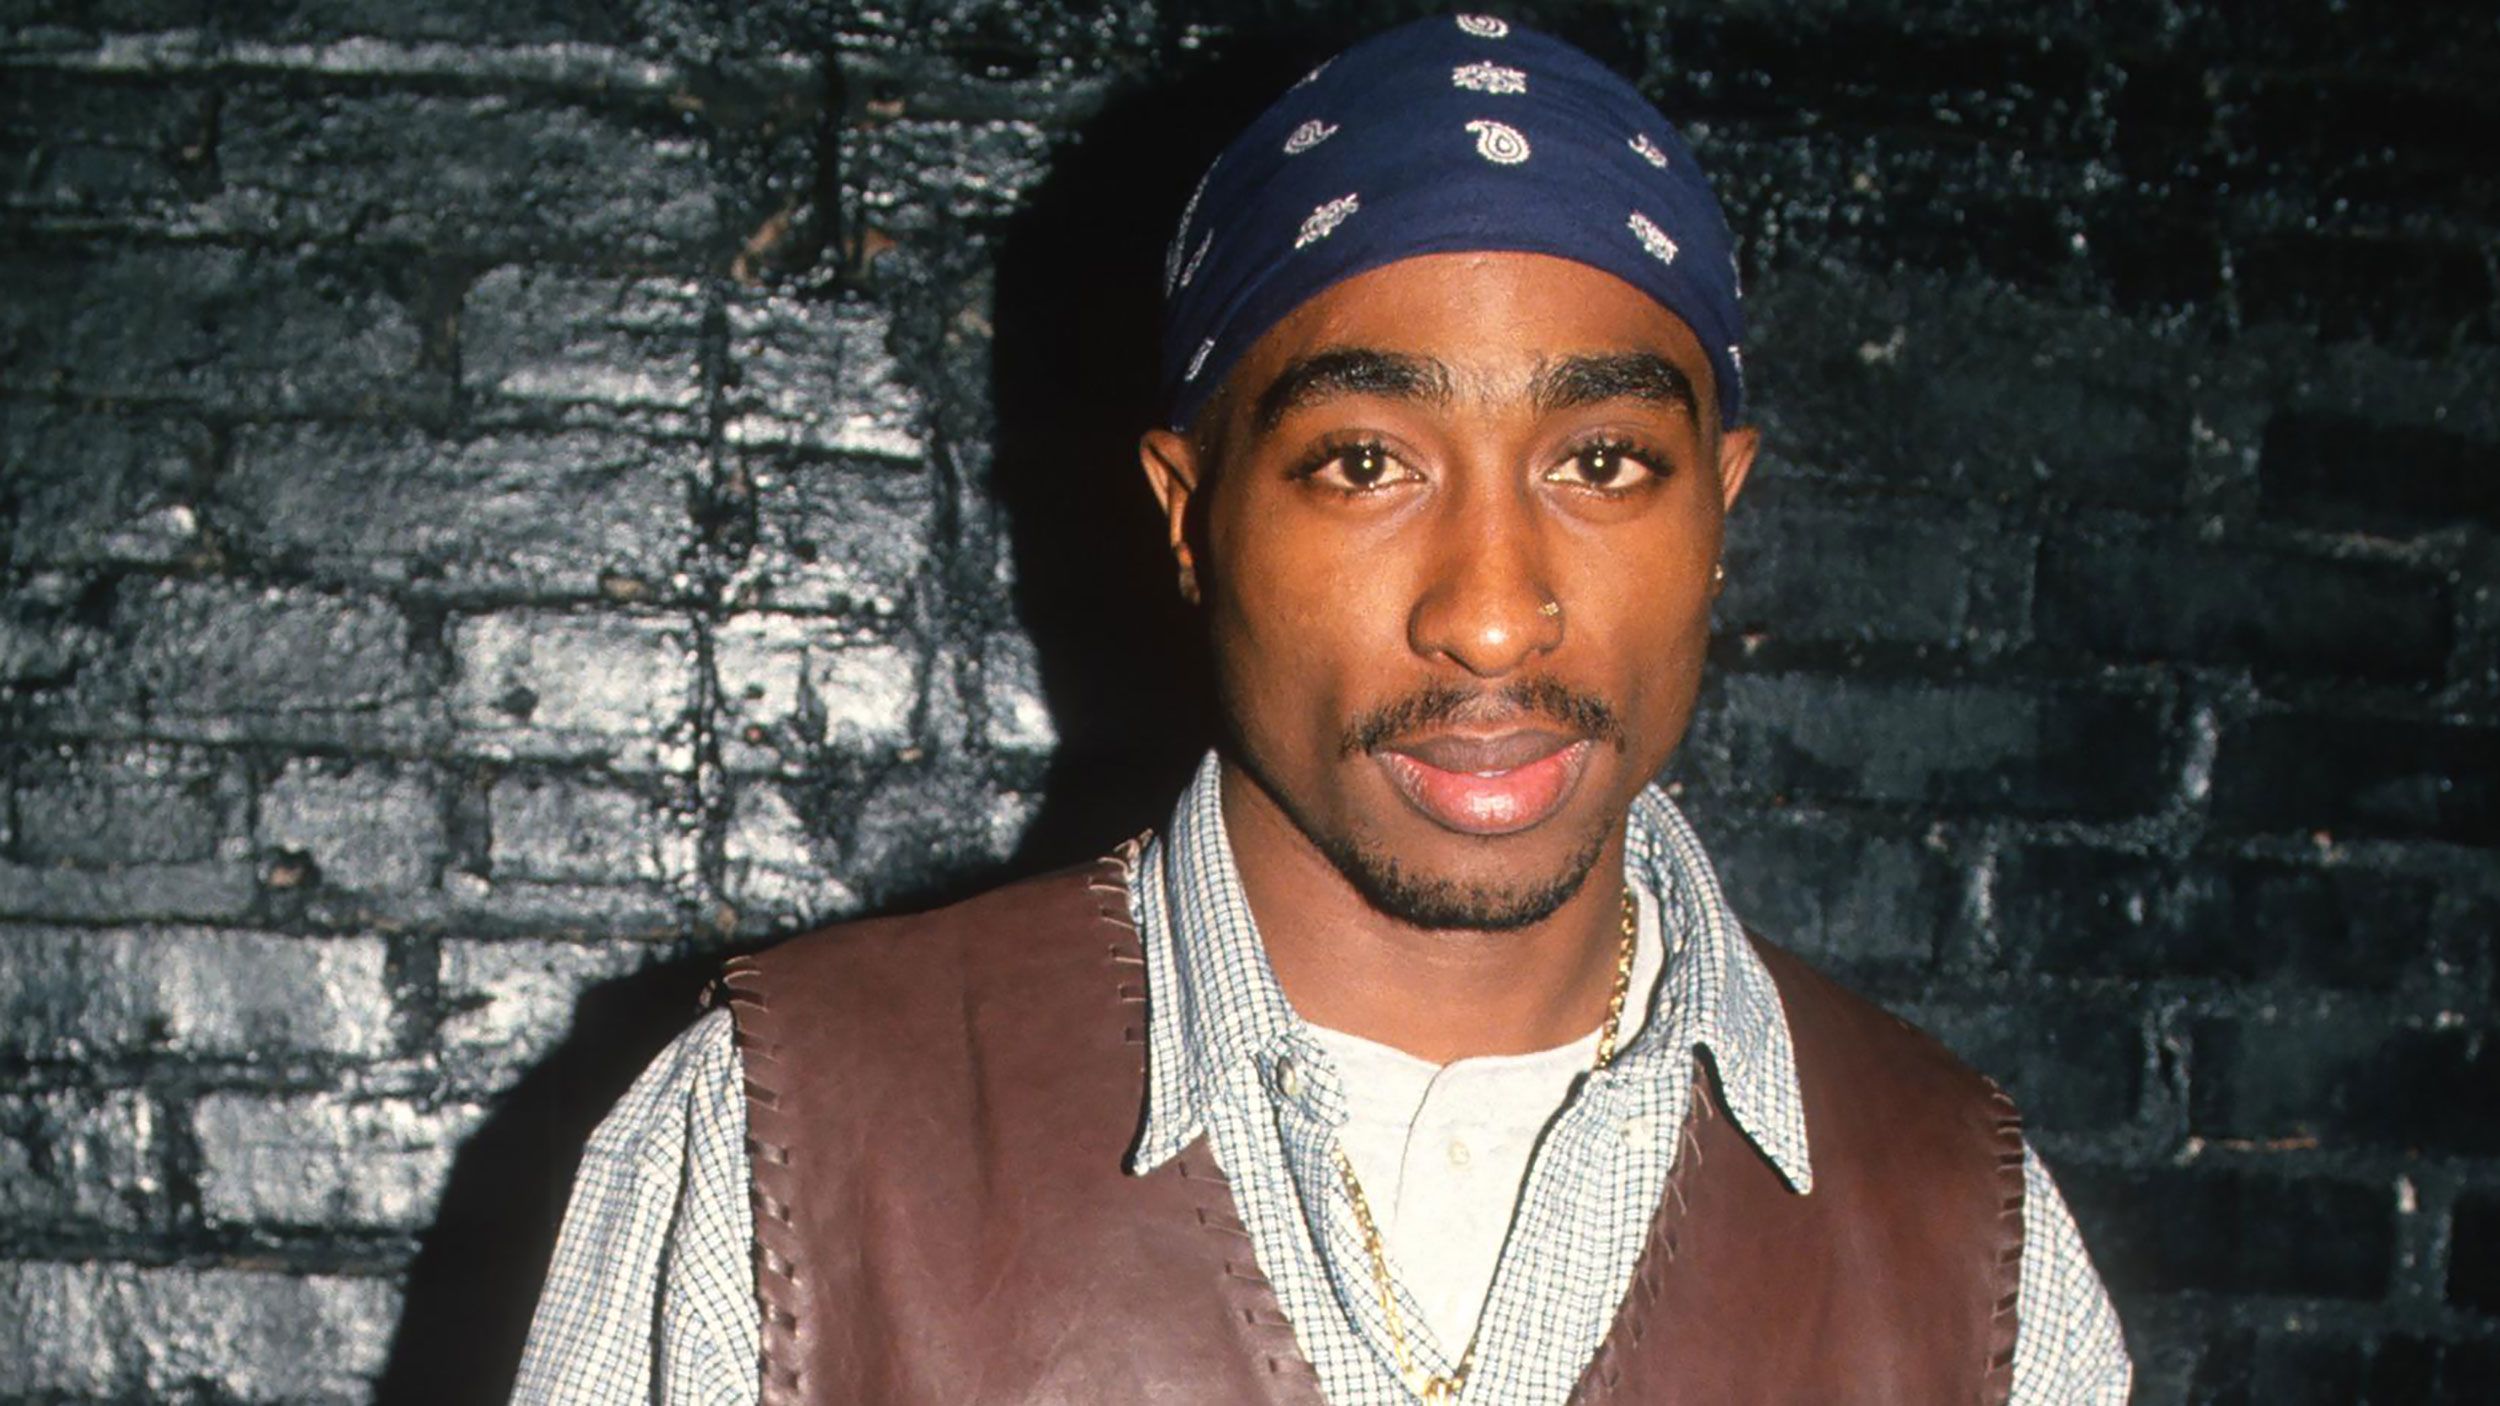 Who killed Tupac Shakur? What to know about the rapper's murder investigation and life | CNN